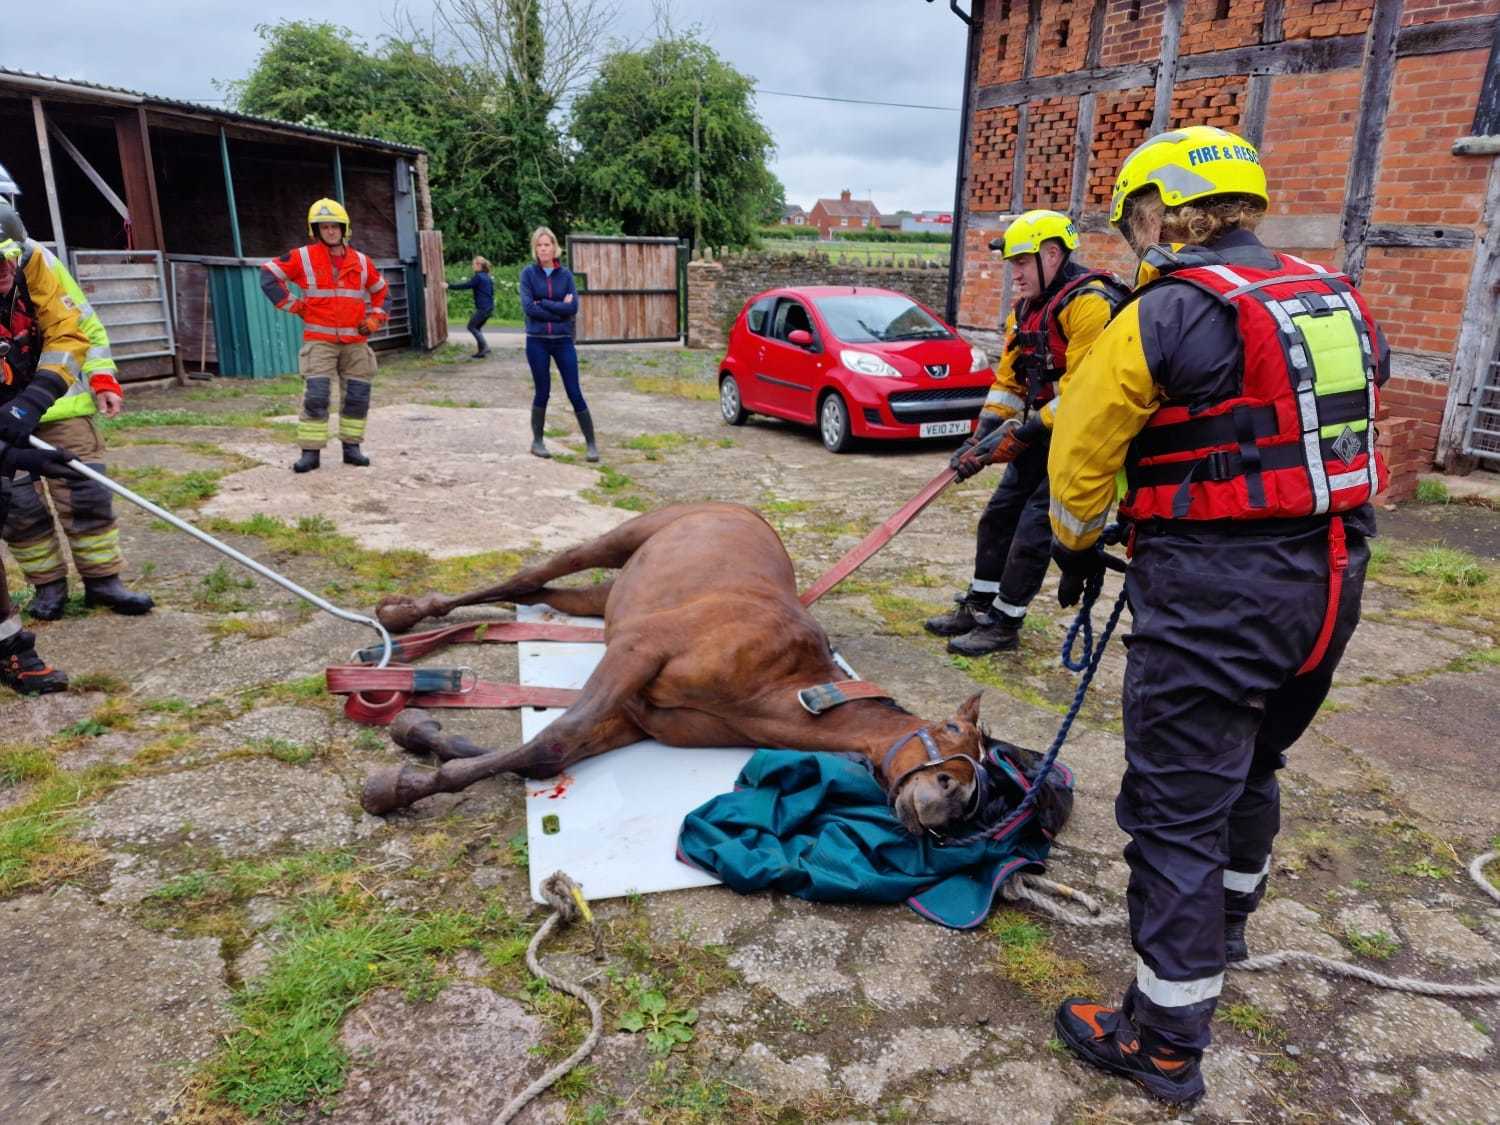 Rio was then put on a board and dragged back towards her stable. Picture: Bromyard fire station